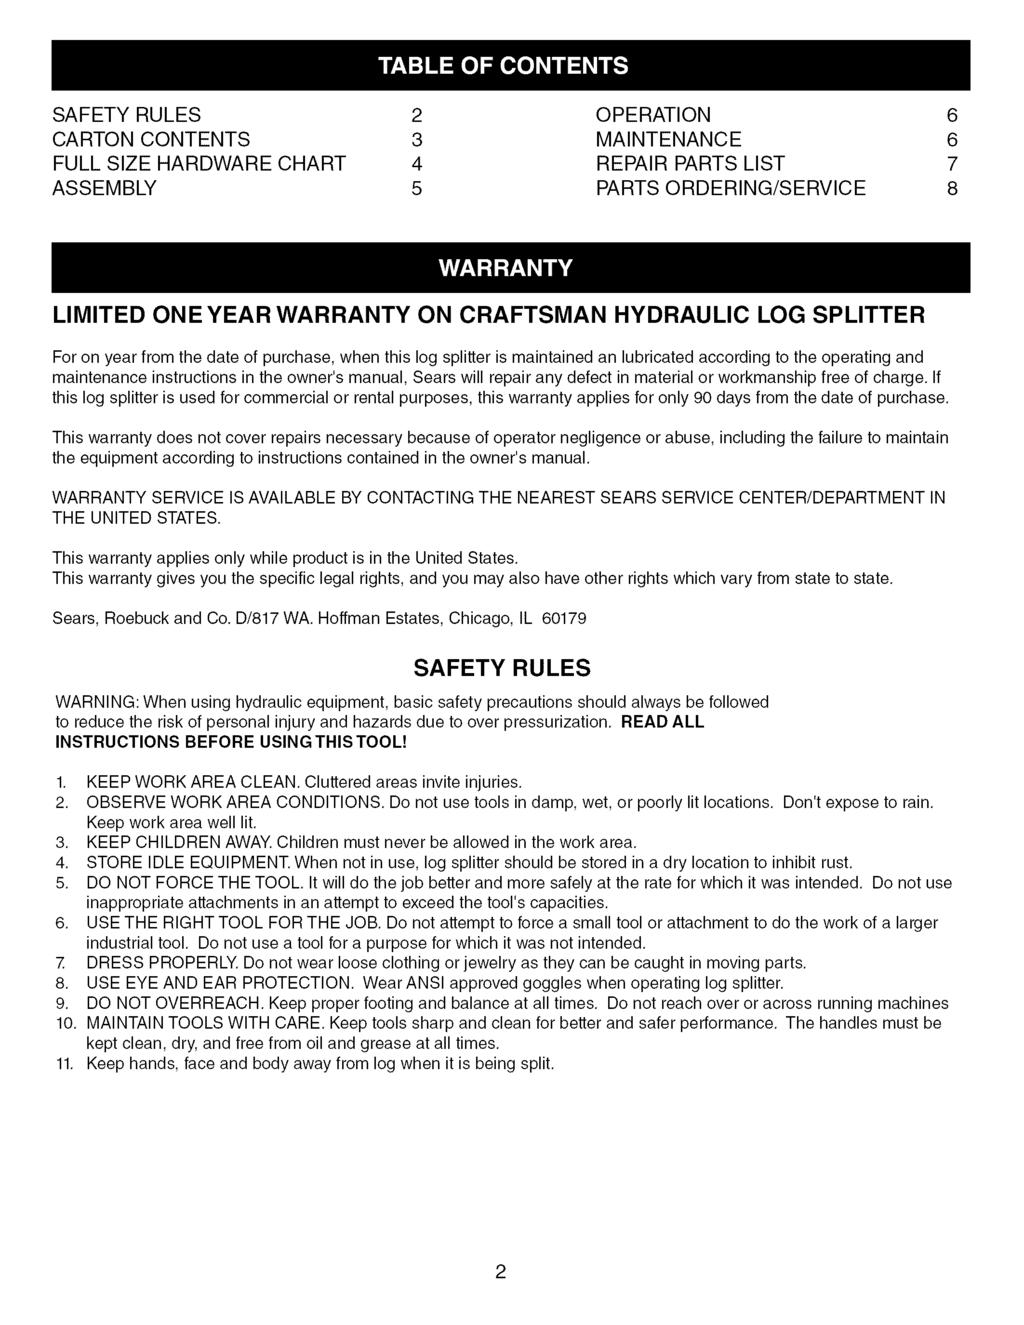 SAFETY RULES CARTON CONTENTS 3 FULL SIZE HARDWARE CHART ASSEMBLY 5 OPERATION 6 MAINTENANCE 6 REPAIR PARTS LIST 7 PARTS ORDERINGSERVICE 8 LIMITED ONE YEAR WARRANTY ON CRAFTSMAN HYDRAULIC LOG SPLITTER